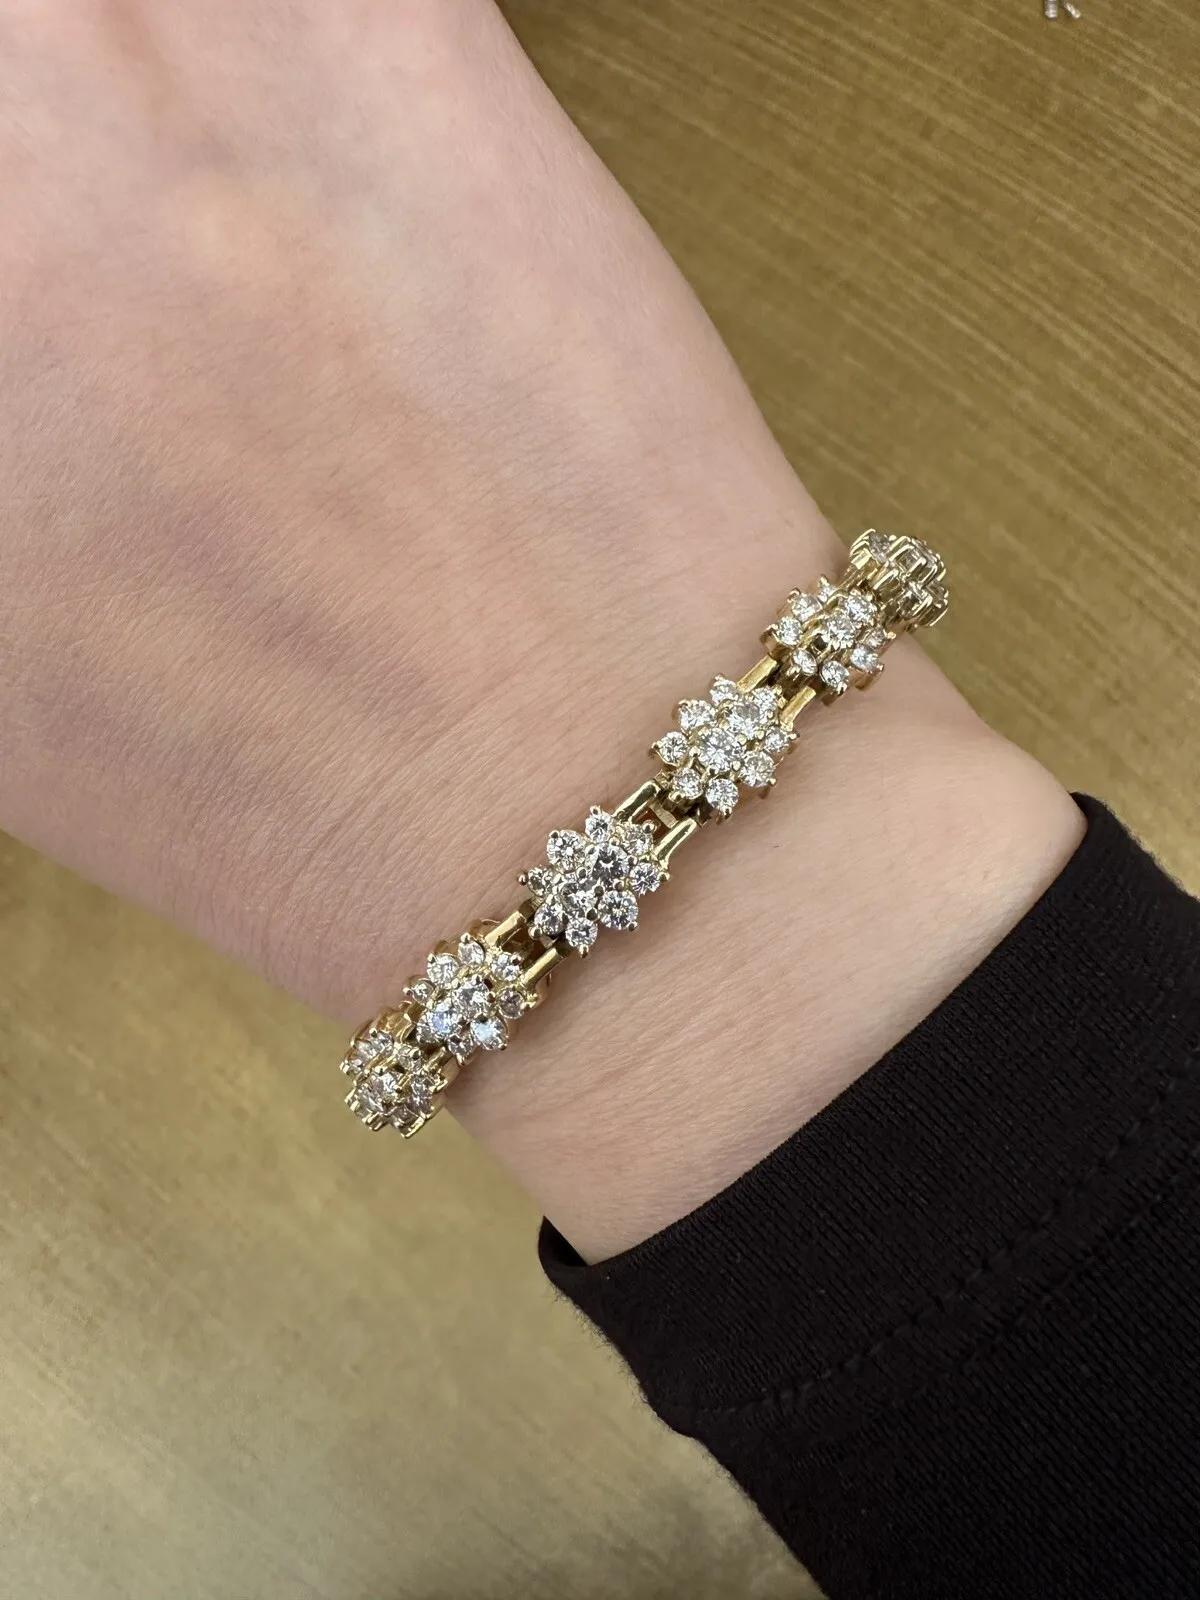 Vintage Cluster Round Diamond Bracelet 6.00 Carat Total in 14k Yellow Gold For Sale 2